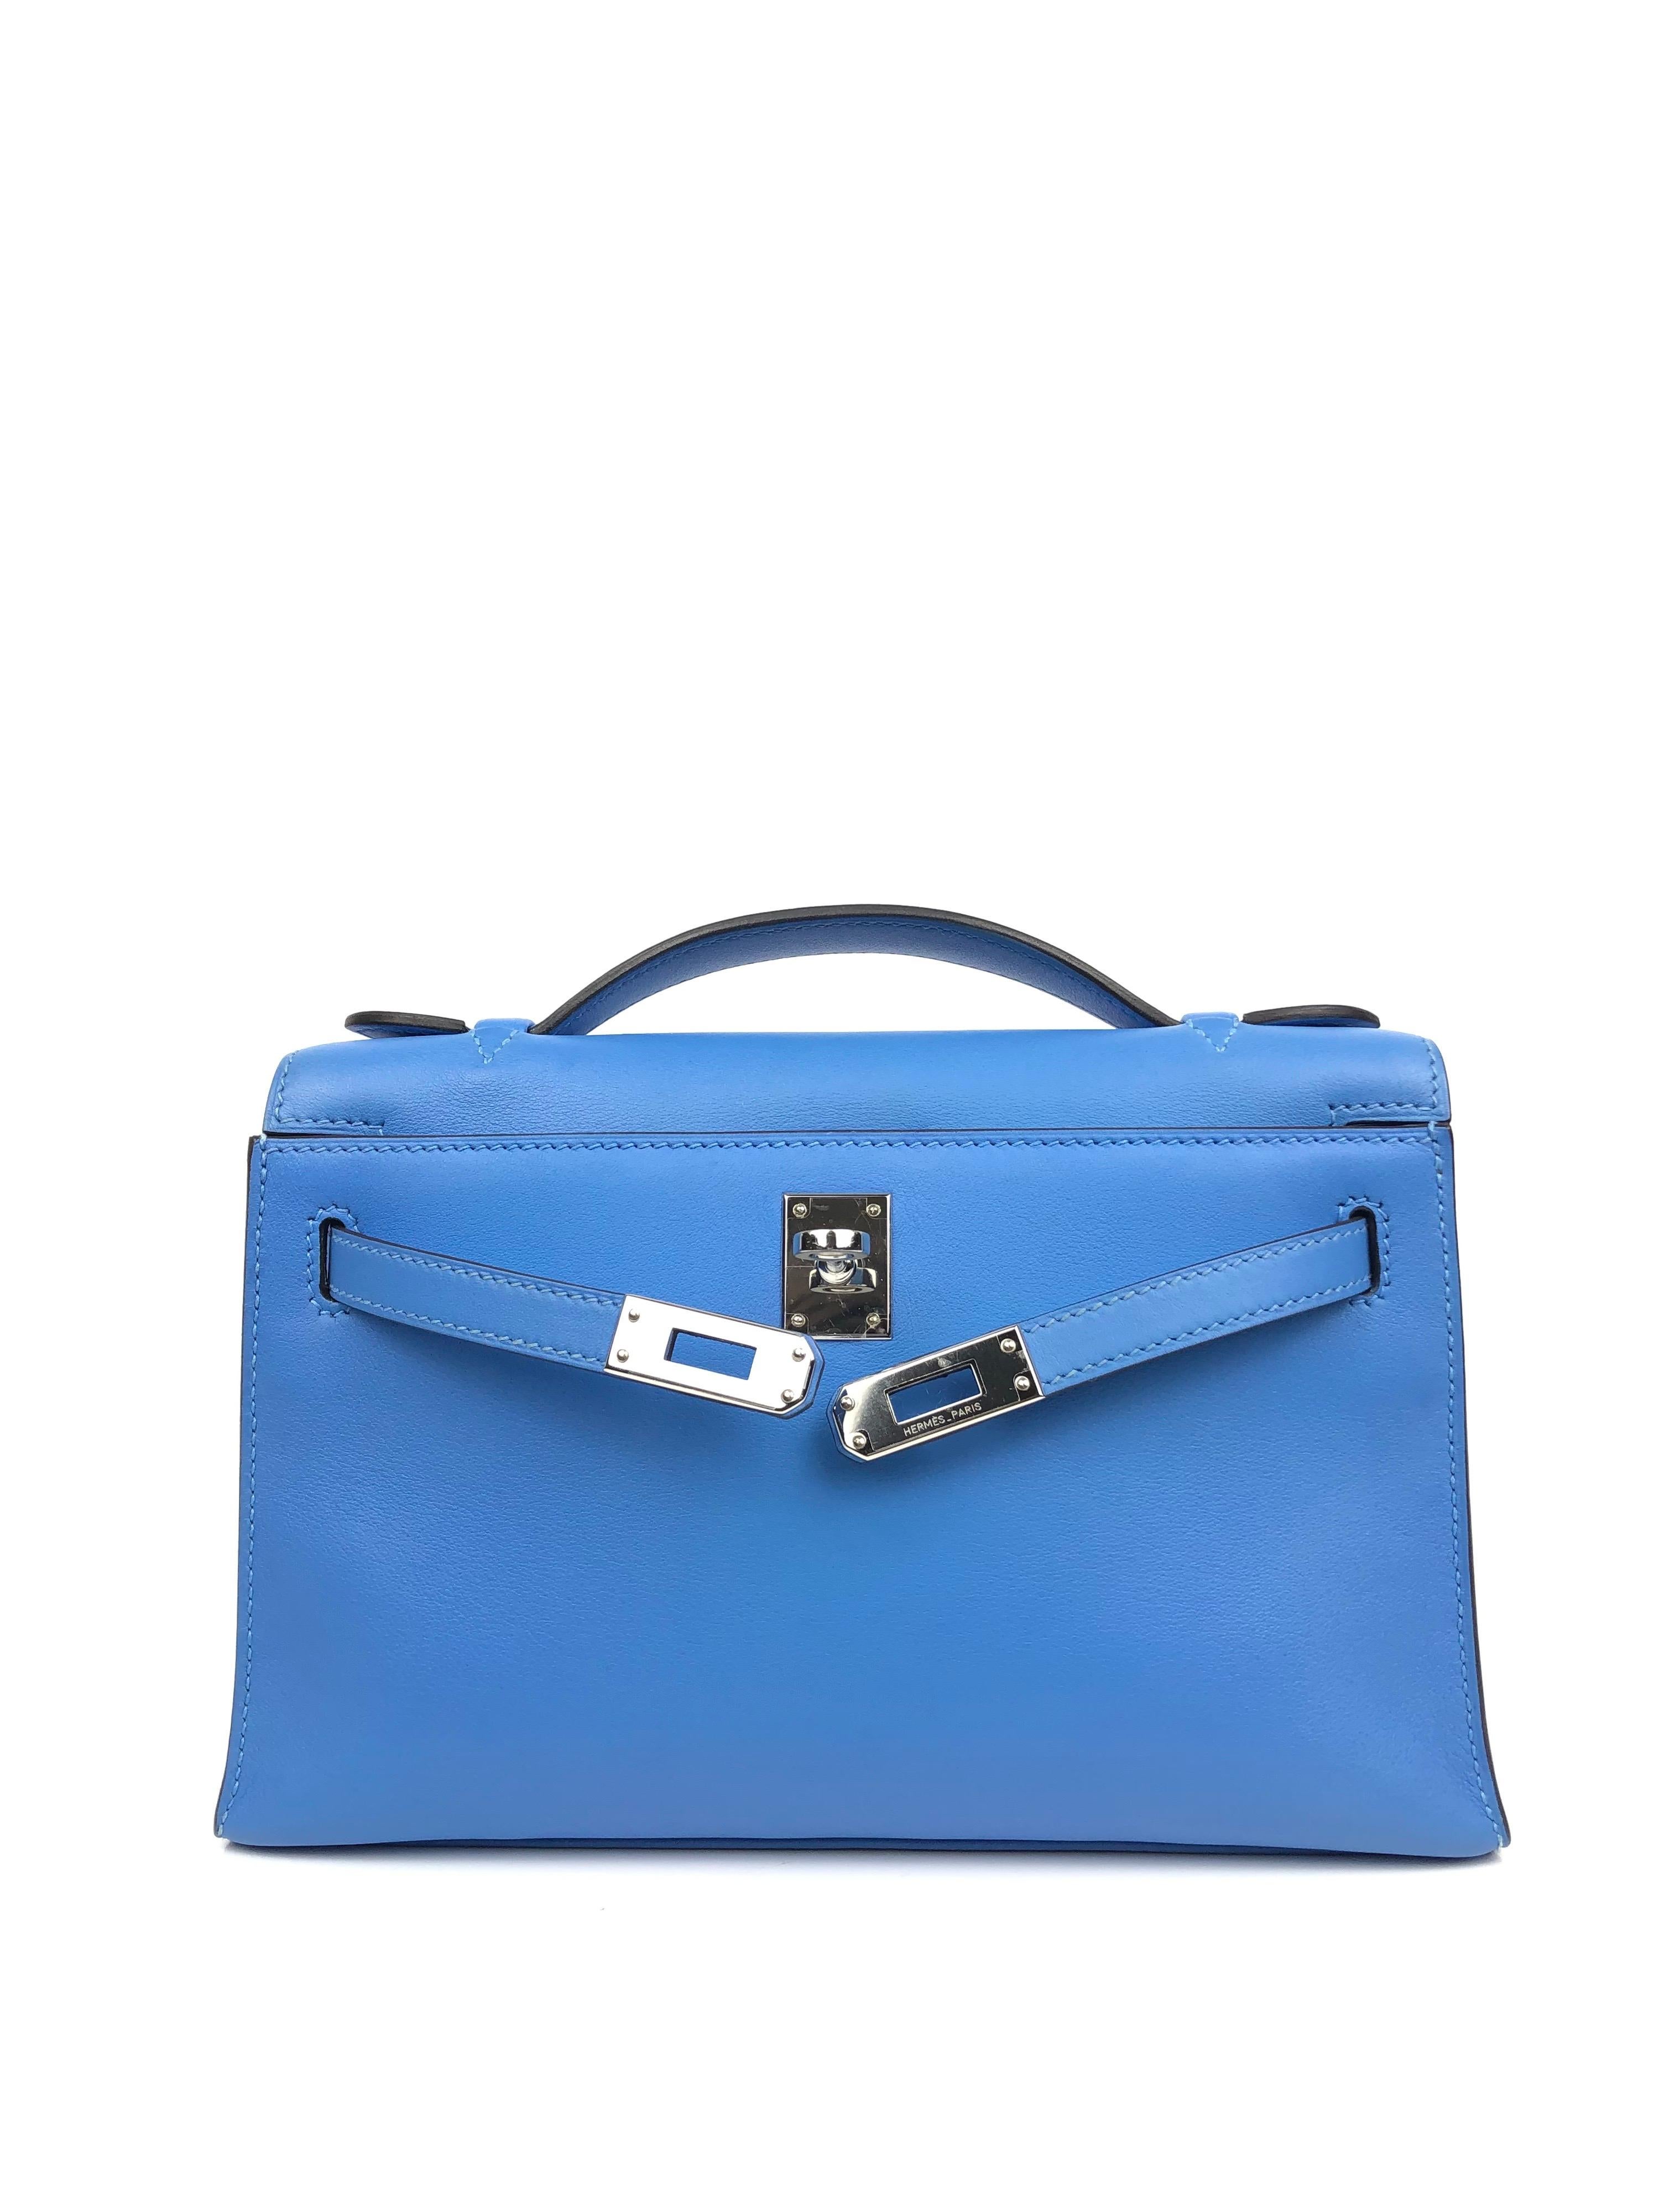 HERMES KELLY POCHETTE BLUE PARADISE PALLADIUM HARDWARE. PRISTINE CONDITION! ALMOST LIKE WITH ALL PLASTIC! T STAMP 2015. 

Shop with Confidence from Lux Addicts. Authenticity Guaranteed!